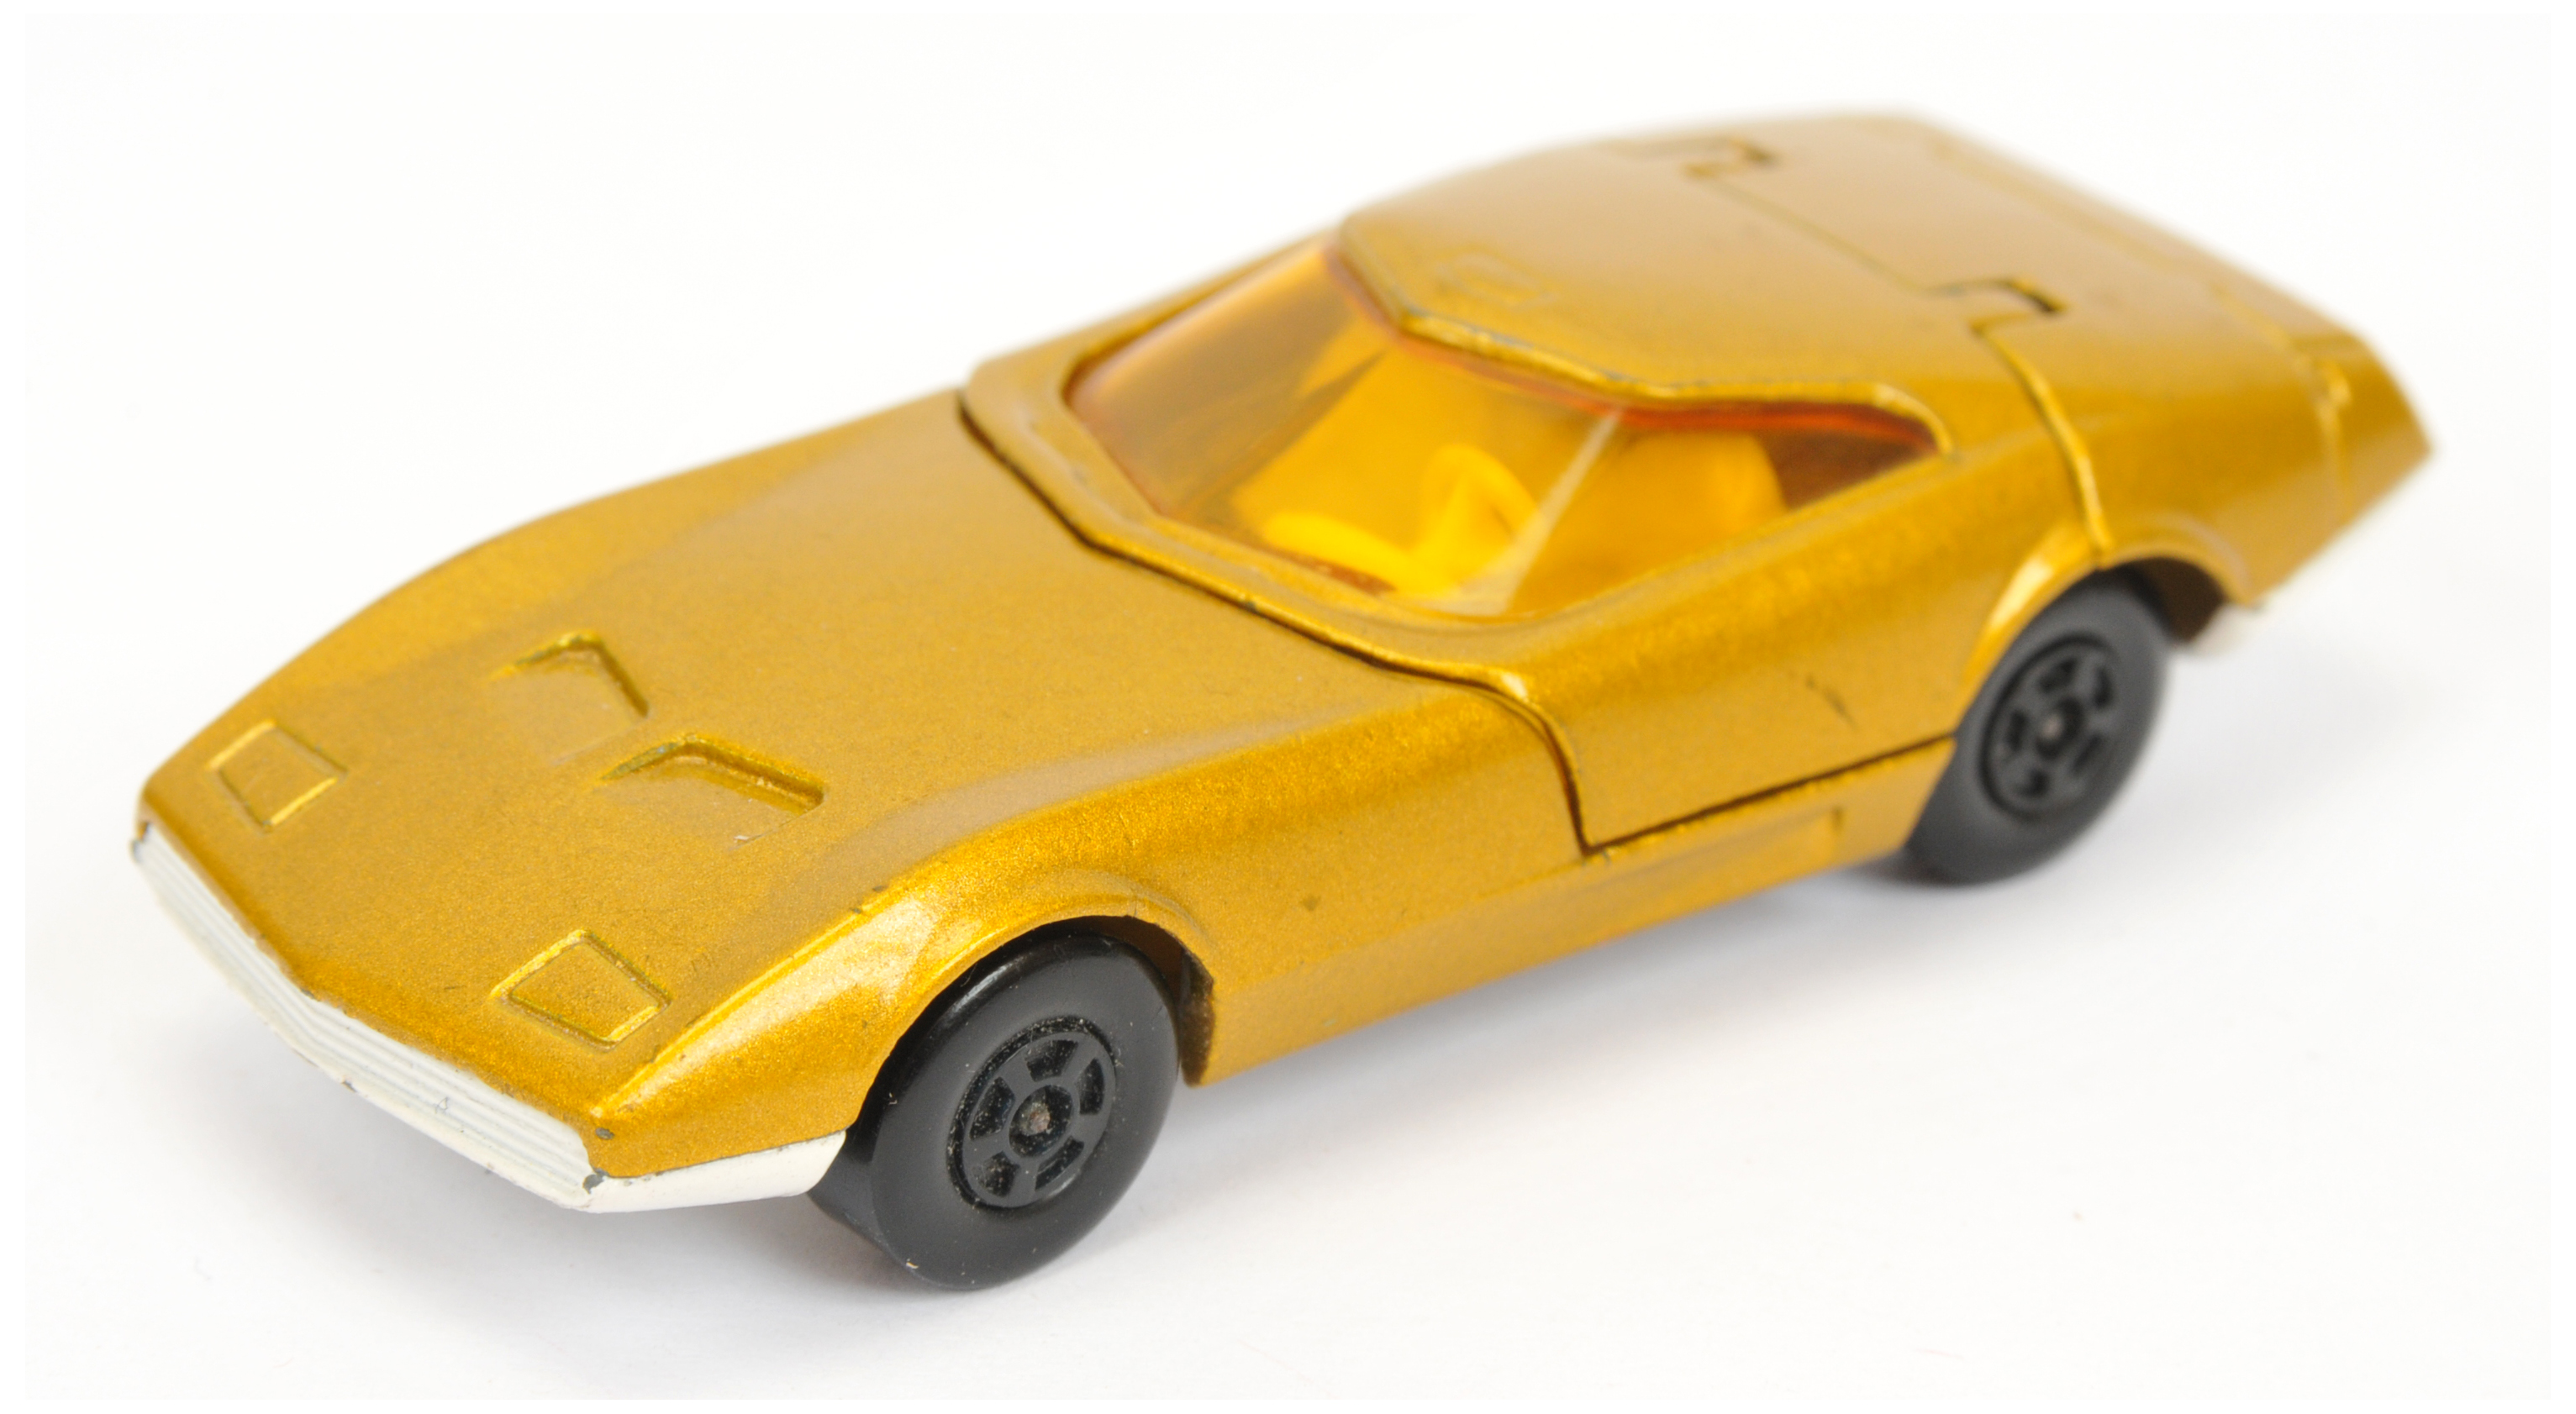 Matchbox Superfast 52a Dodge Charger Factory Pre-production Colour Trial model - metallic gold bo...